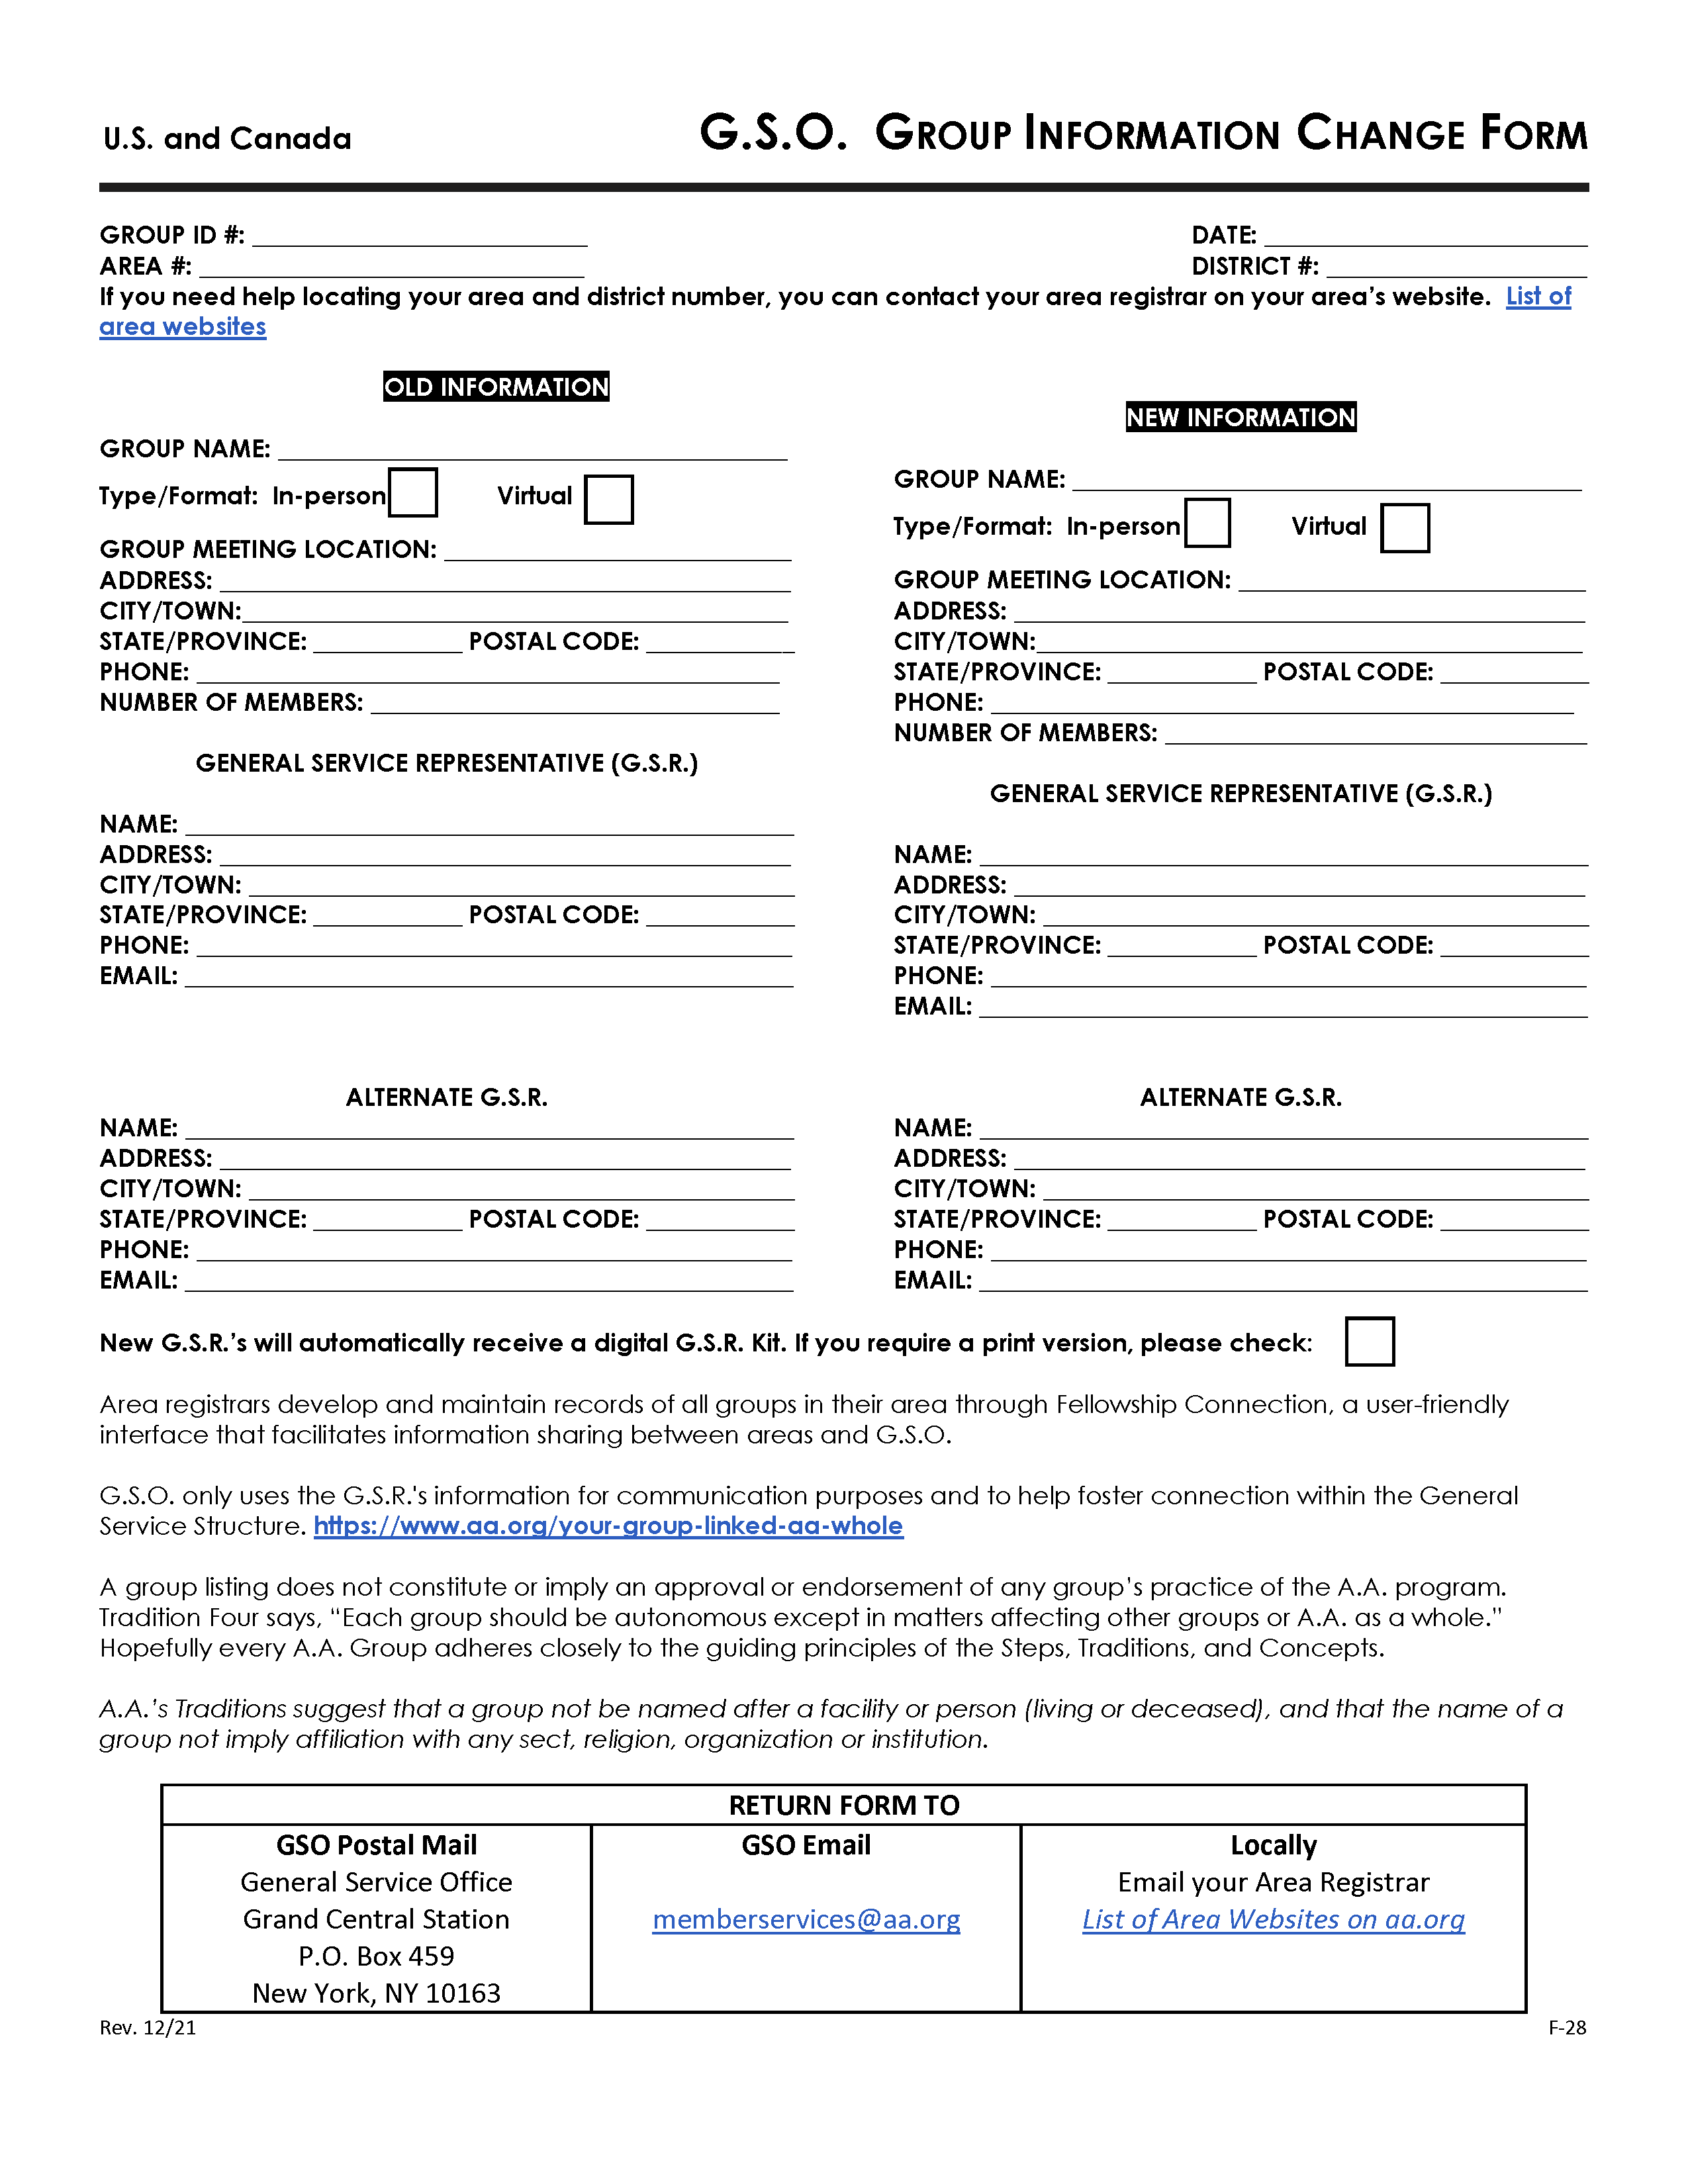 A.A. Group Information Change Form F-28